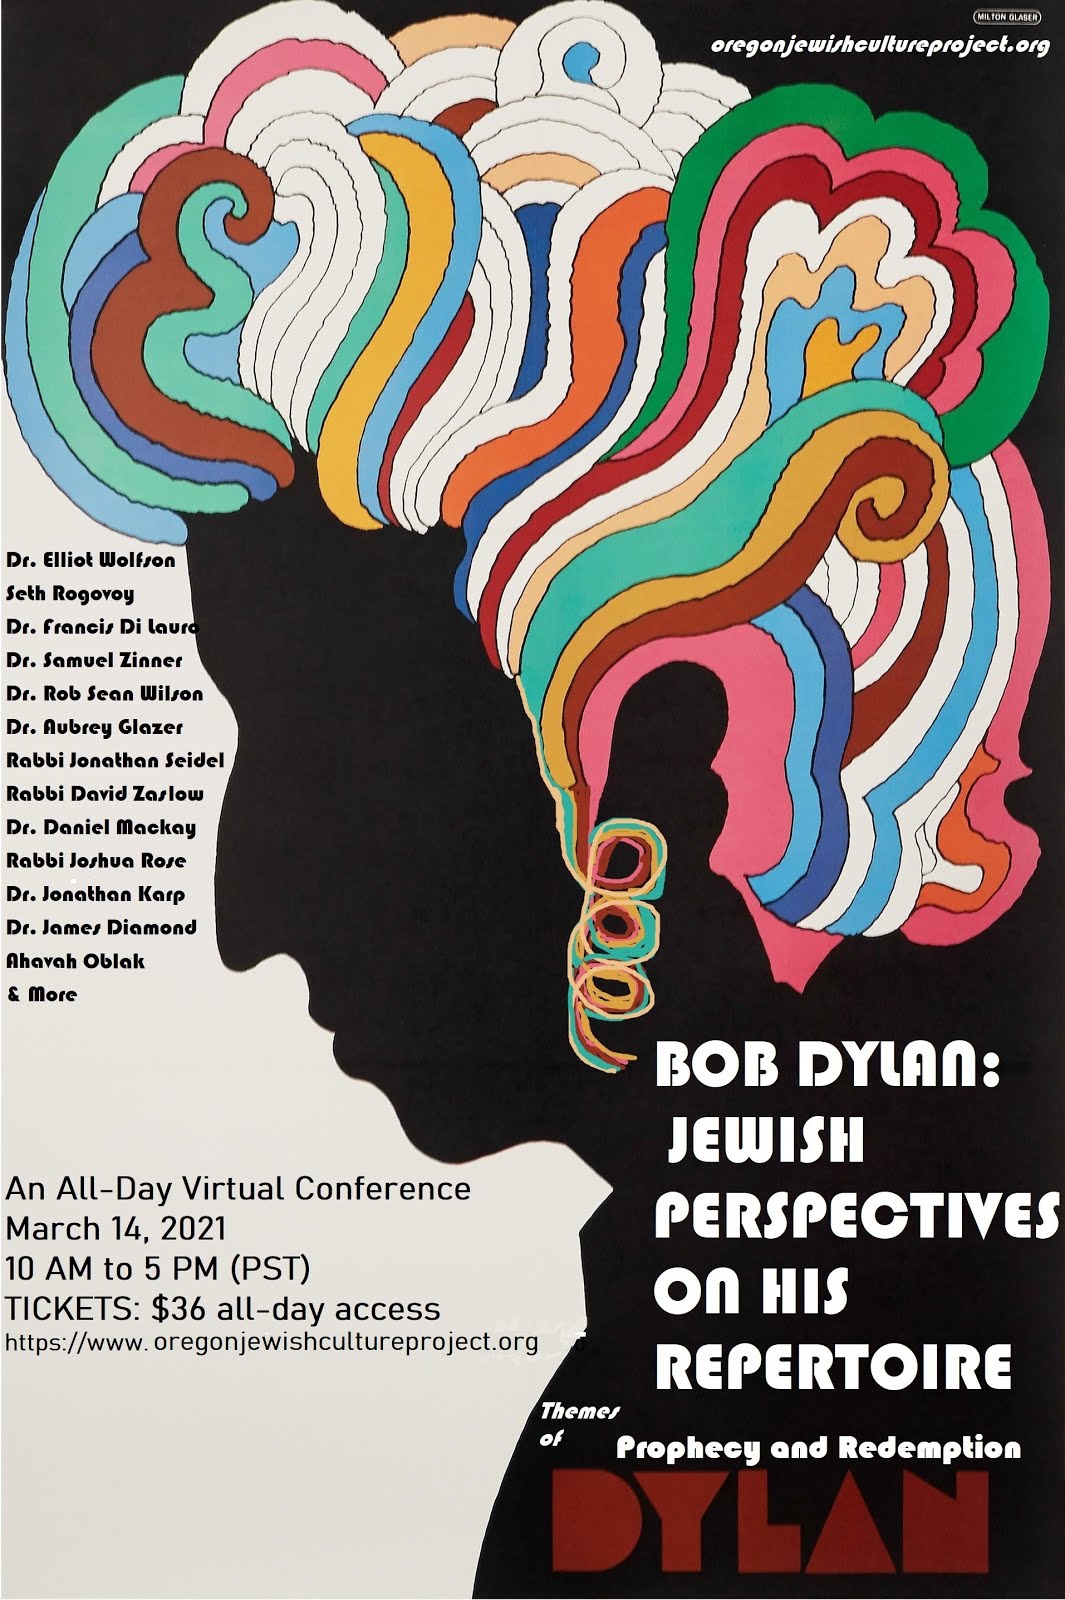 Bob Dylan: Jewish Perspectives On His Repertoire